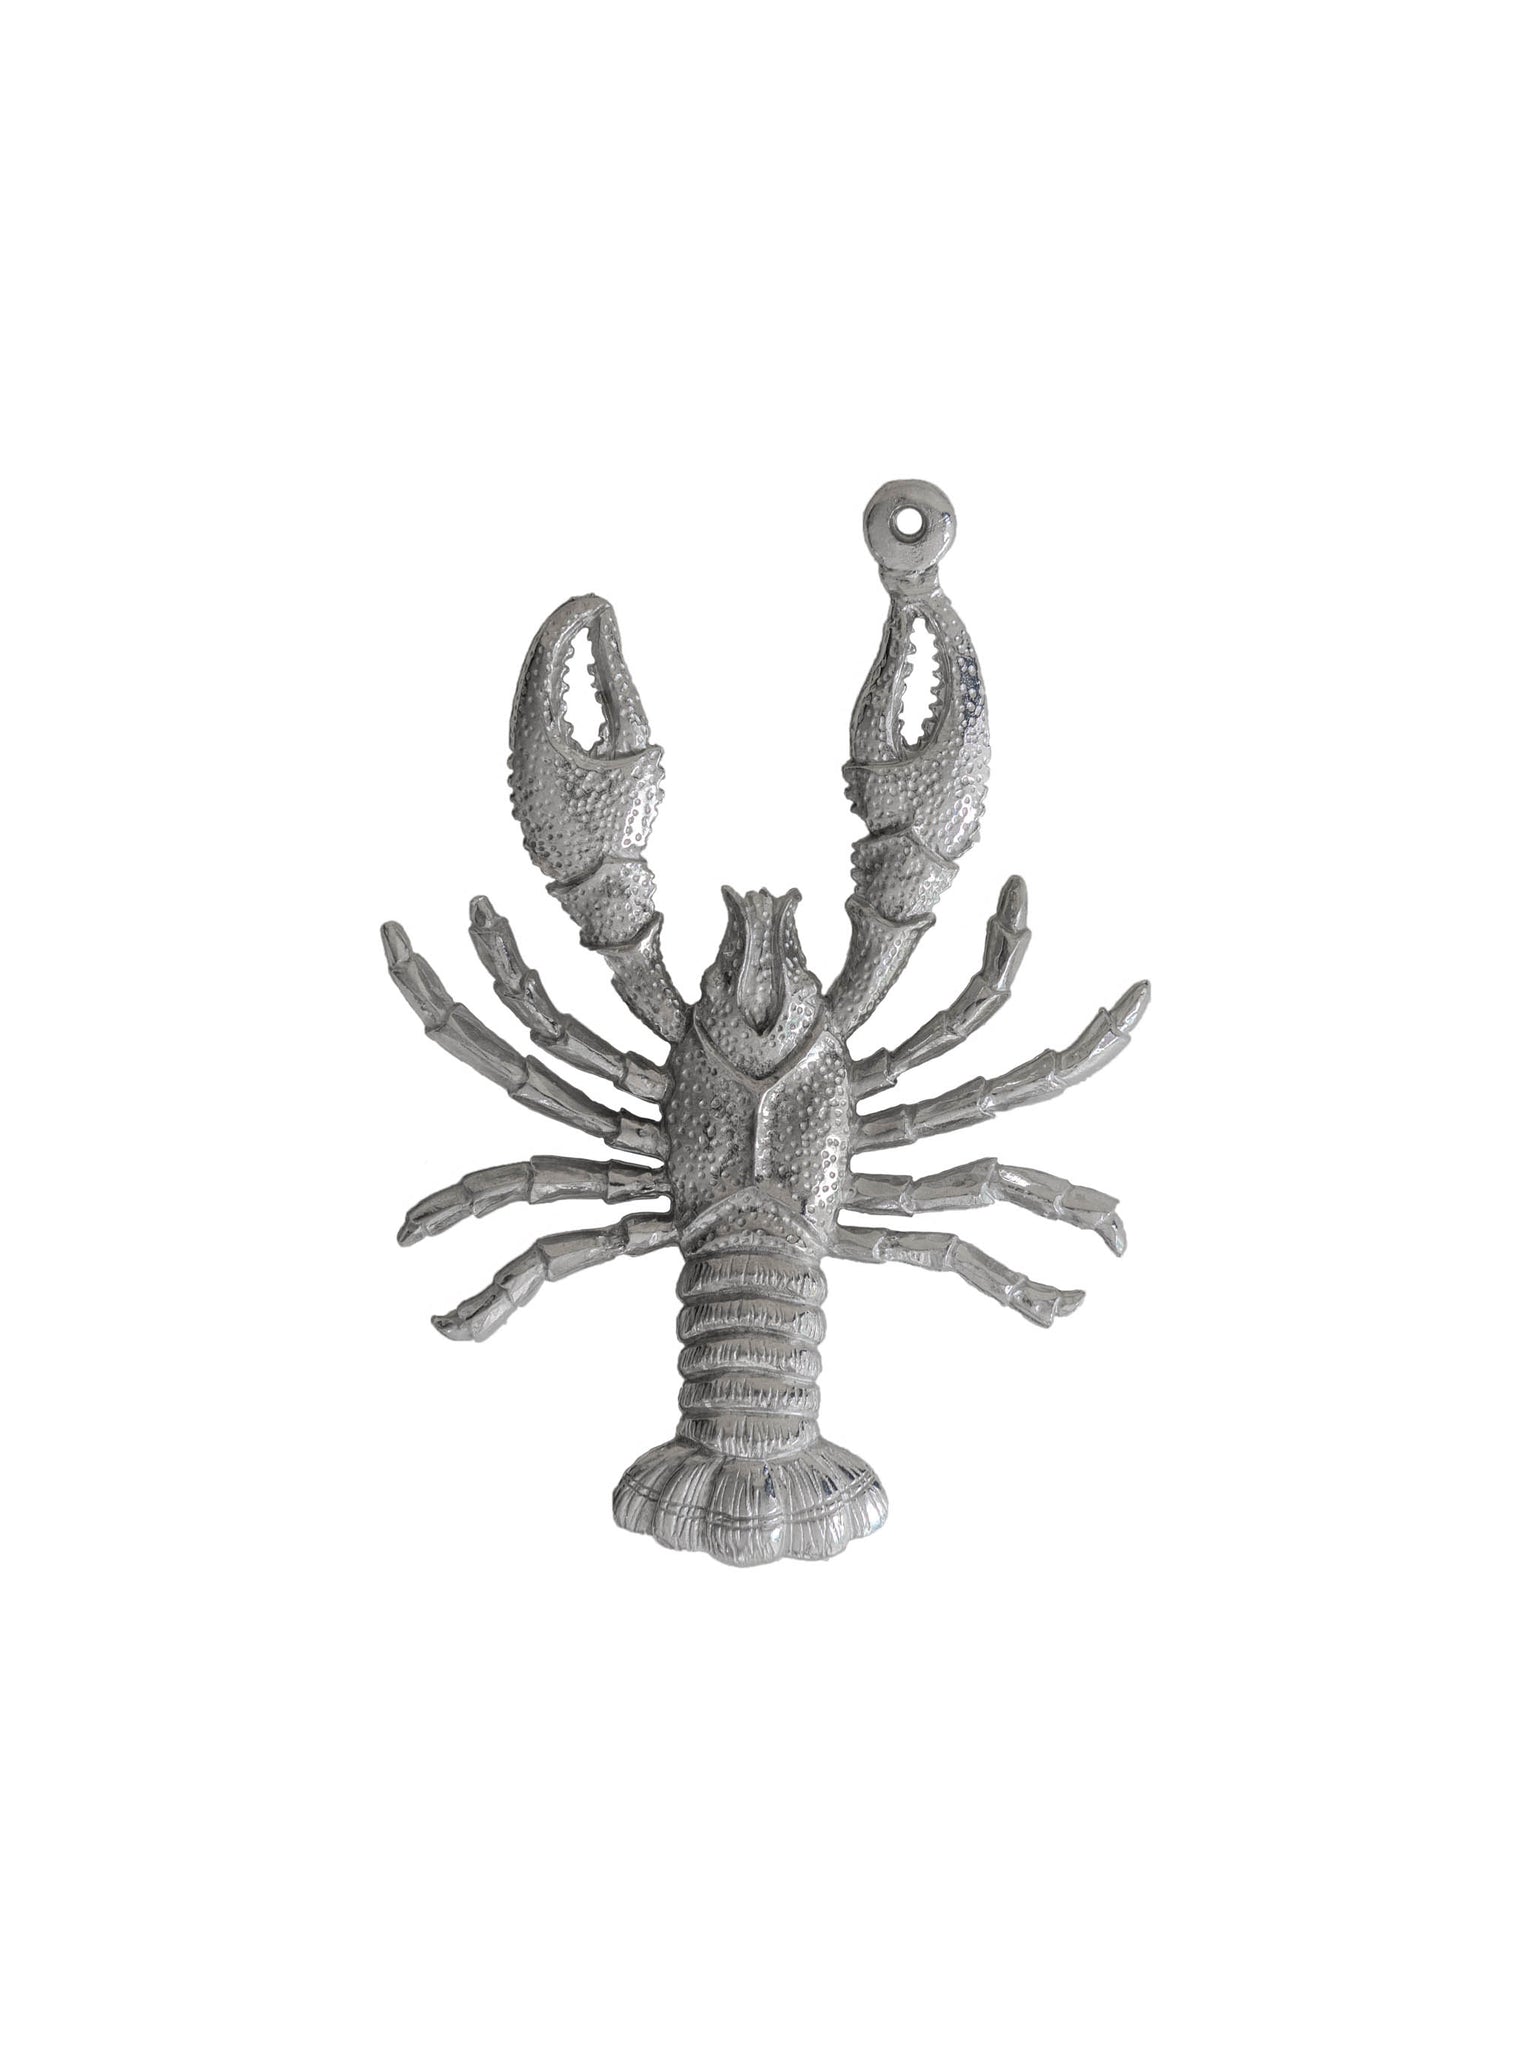 WT Pewter Lobster Ornament Weston Table